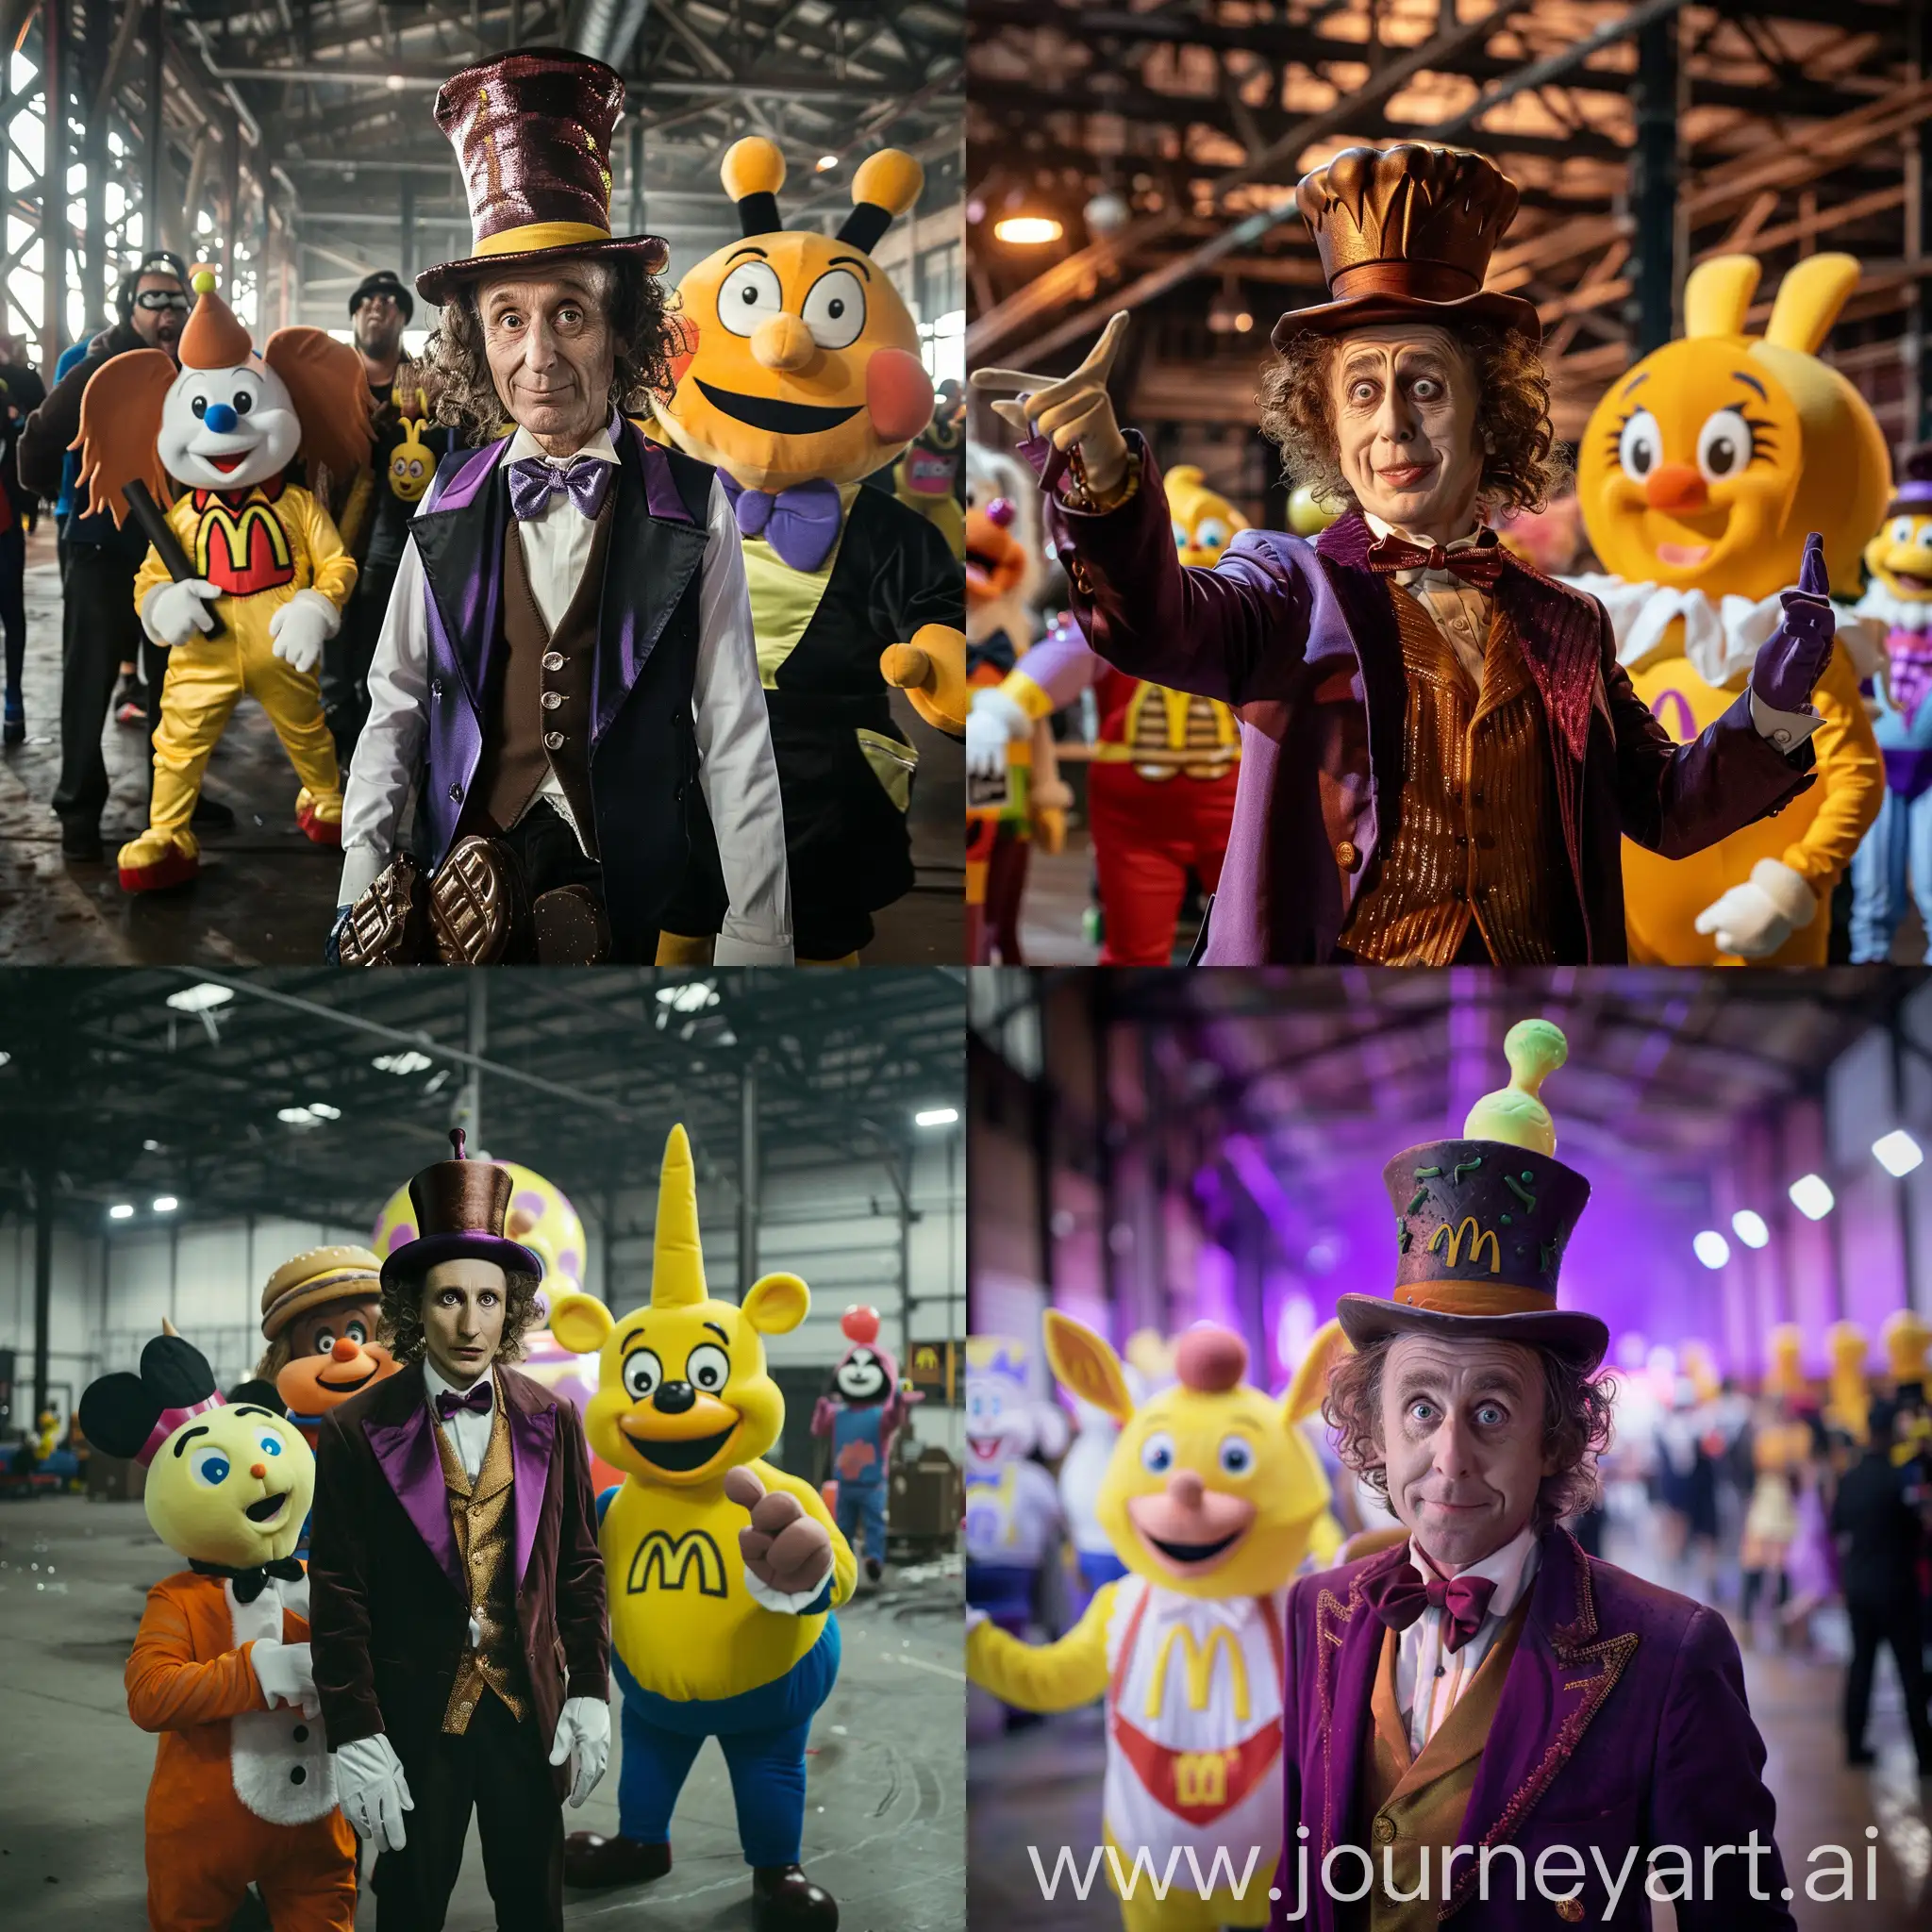 Willy-Wonka-Hosting-Chaotic-Warehouse-Rave-with-McDonalds-and-Nickelodeon-Characters